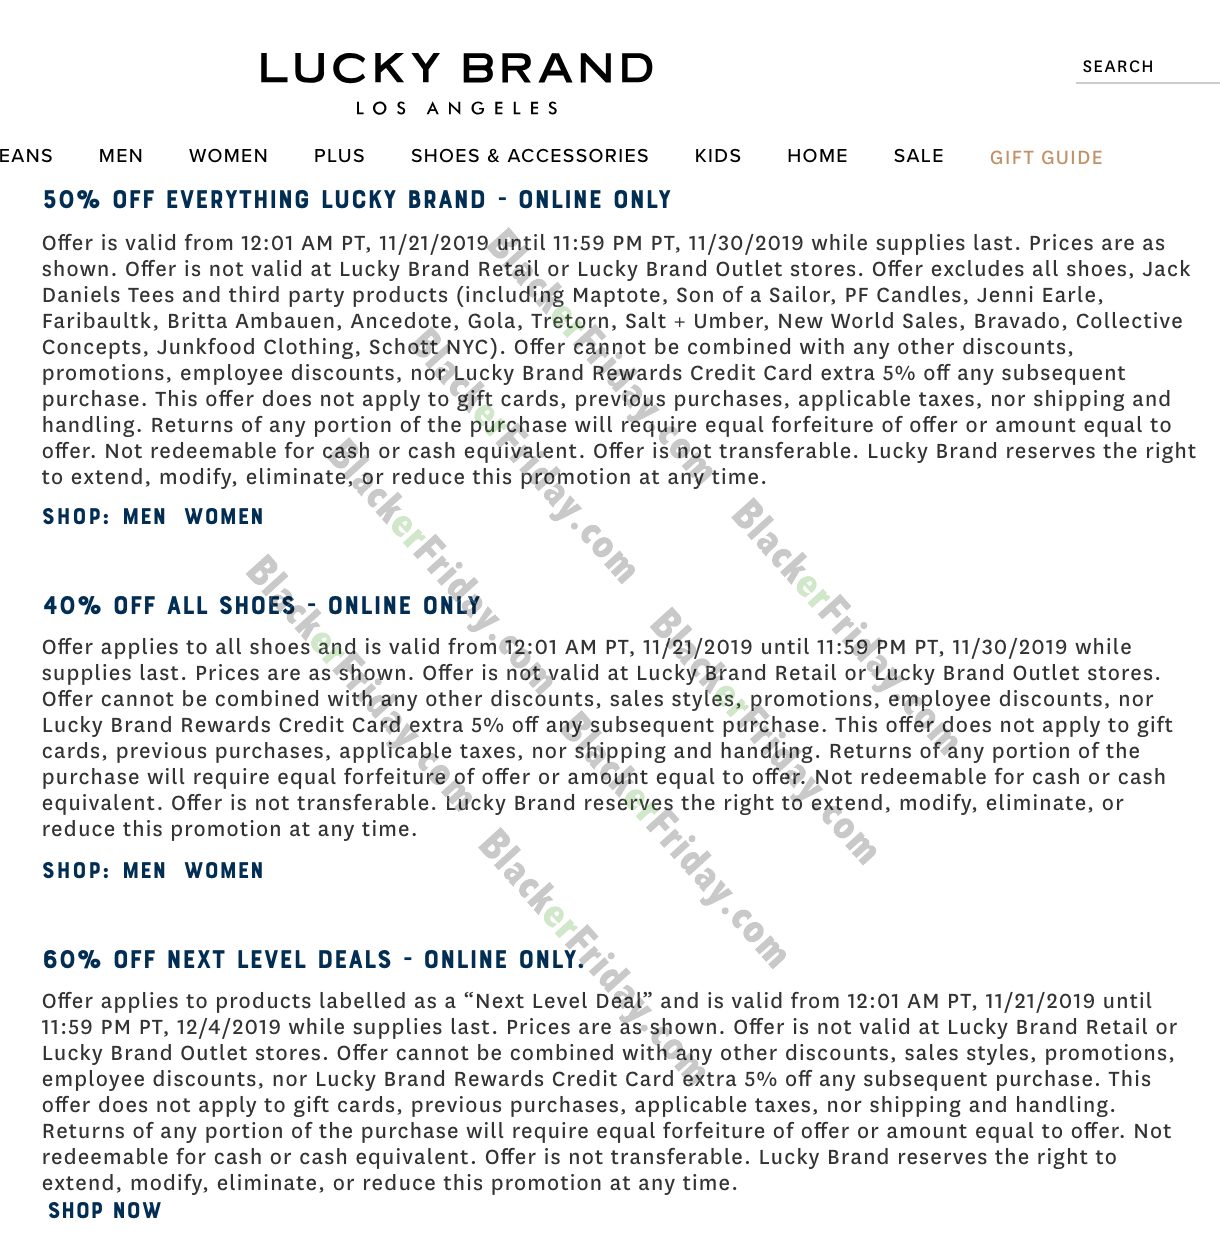 lucky brand outlet black friday